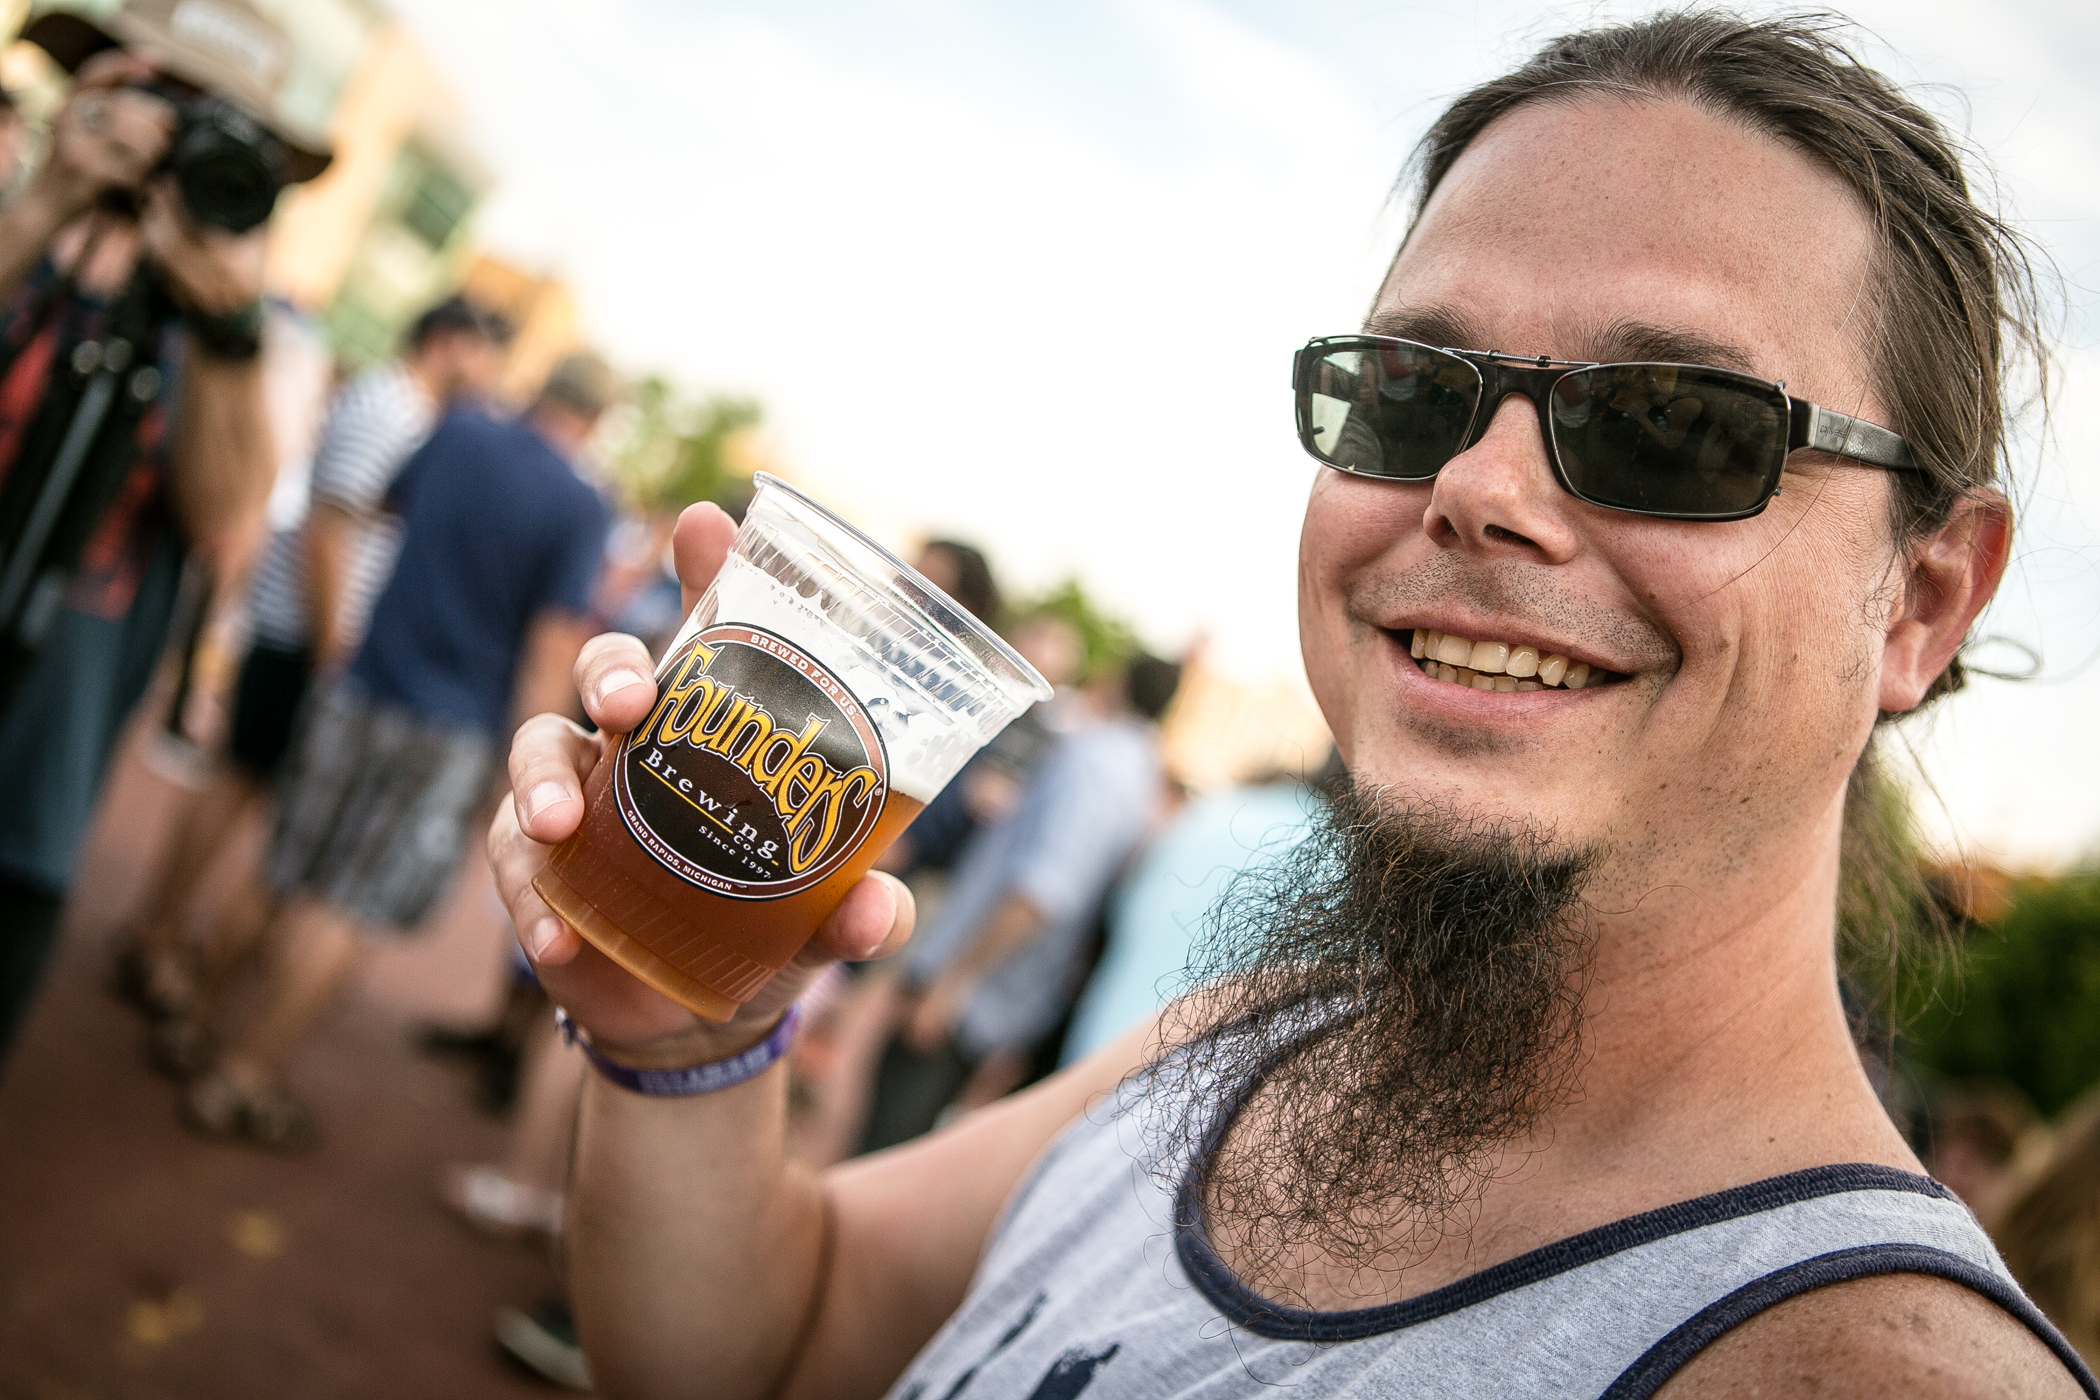   Brewmaster Jeremy Kosmicki, the man behind the All Day IPA, at Founders Fest 2016.  